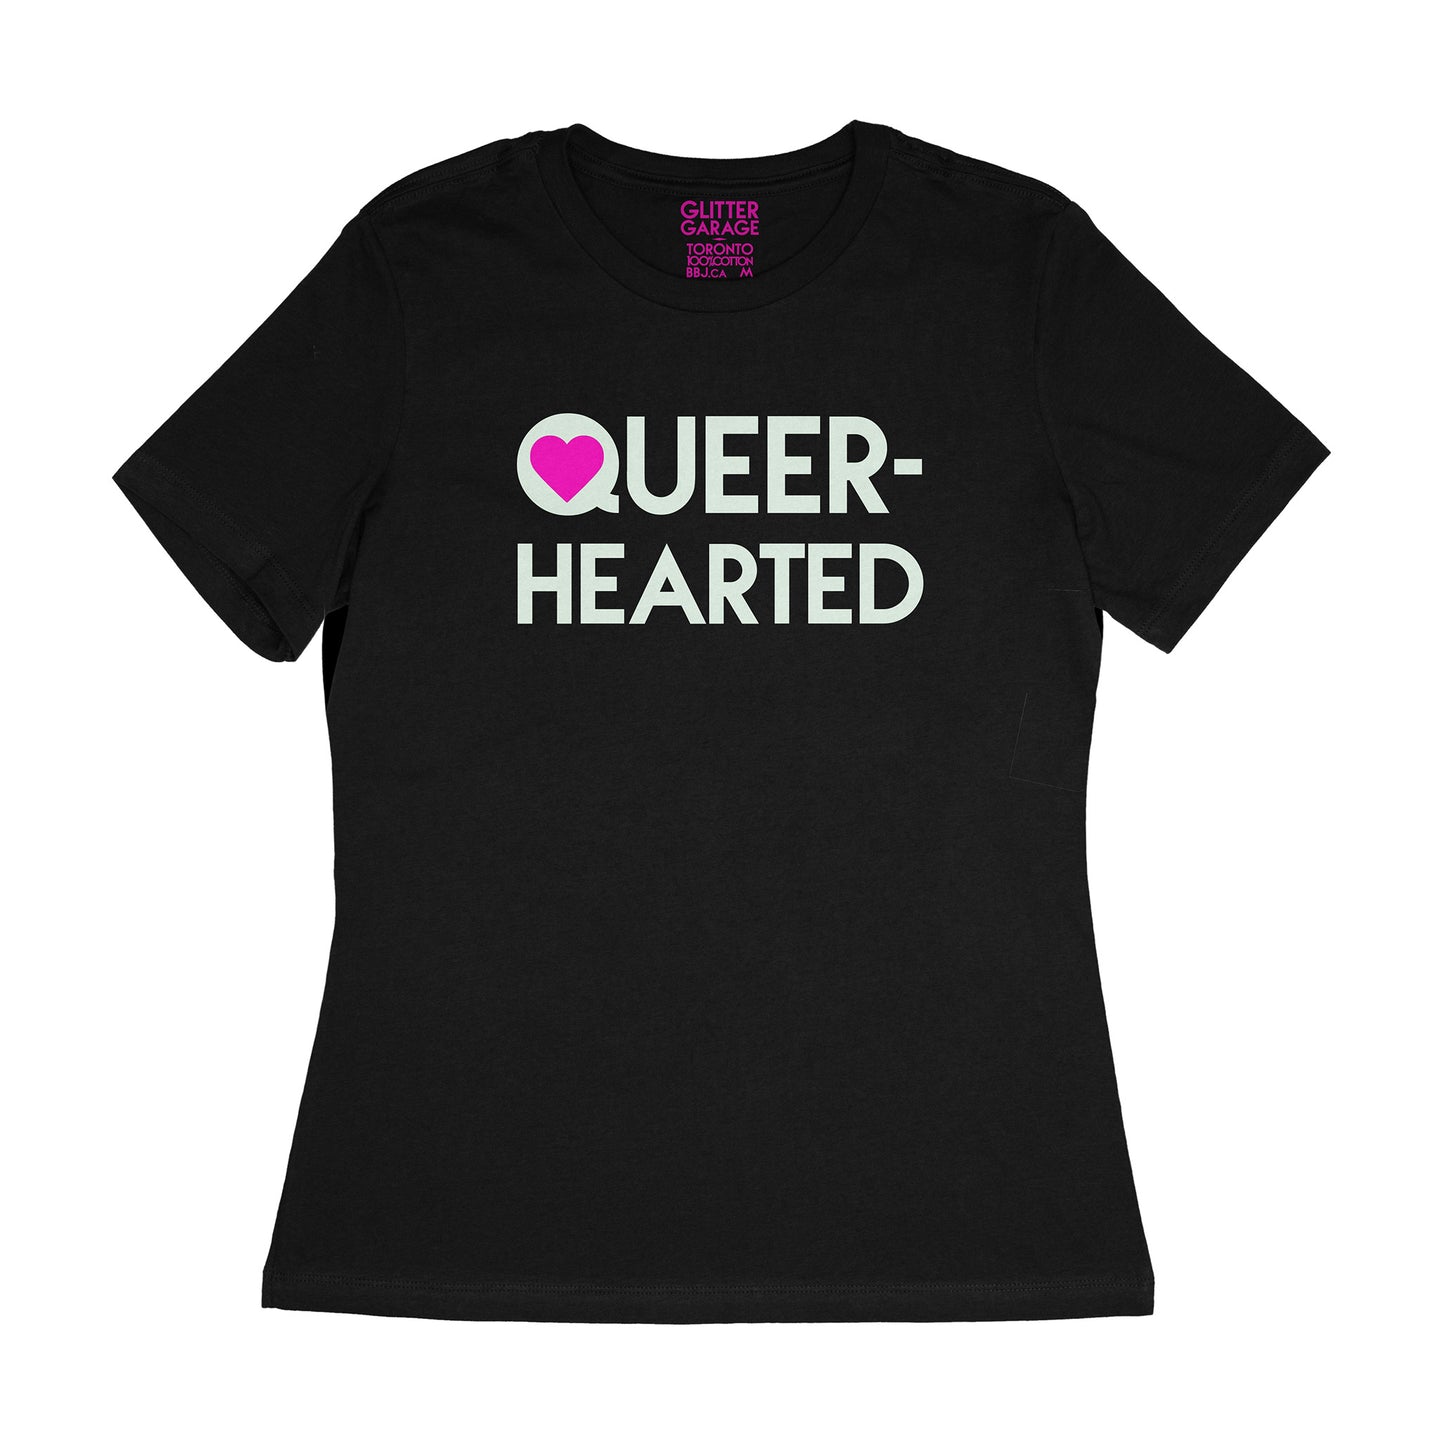 Queer-hearted glow-in-the-dark vinyl text and and neon pink heart on black women's relaxed fit t-shirt - by BBJ / Glitter Garage